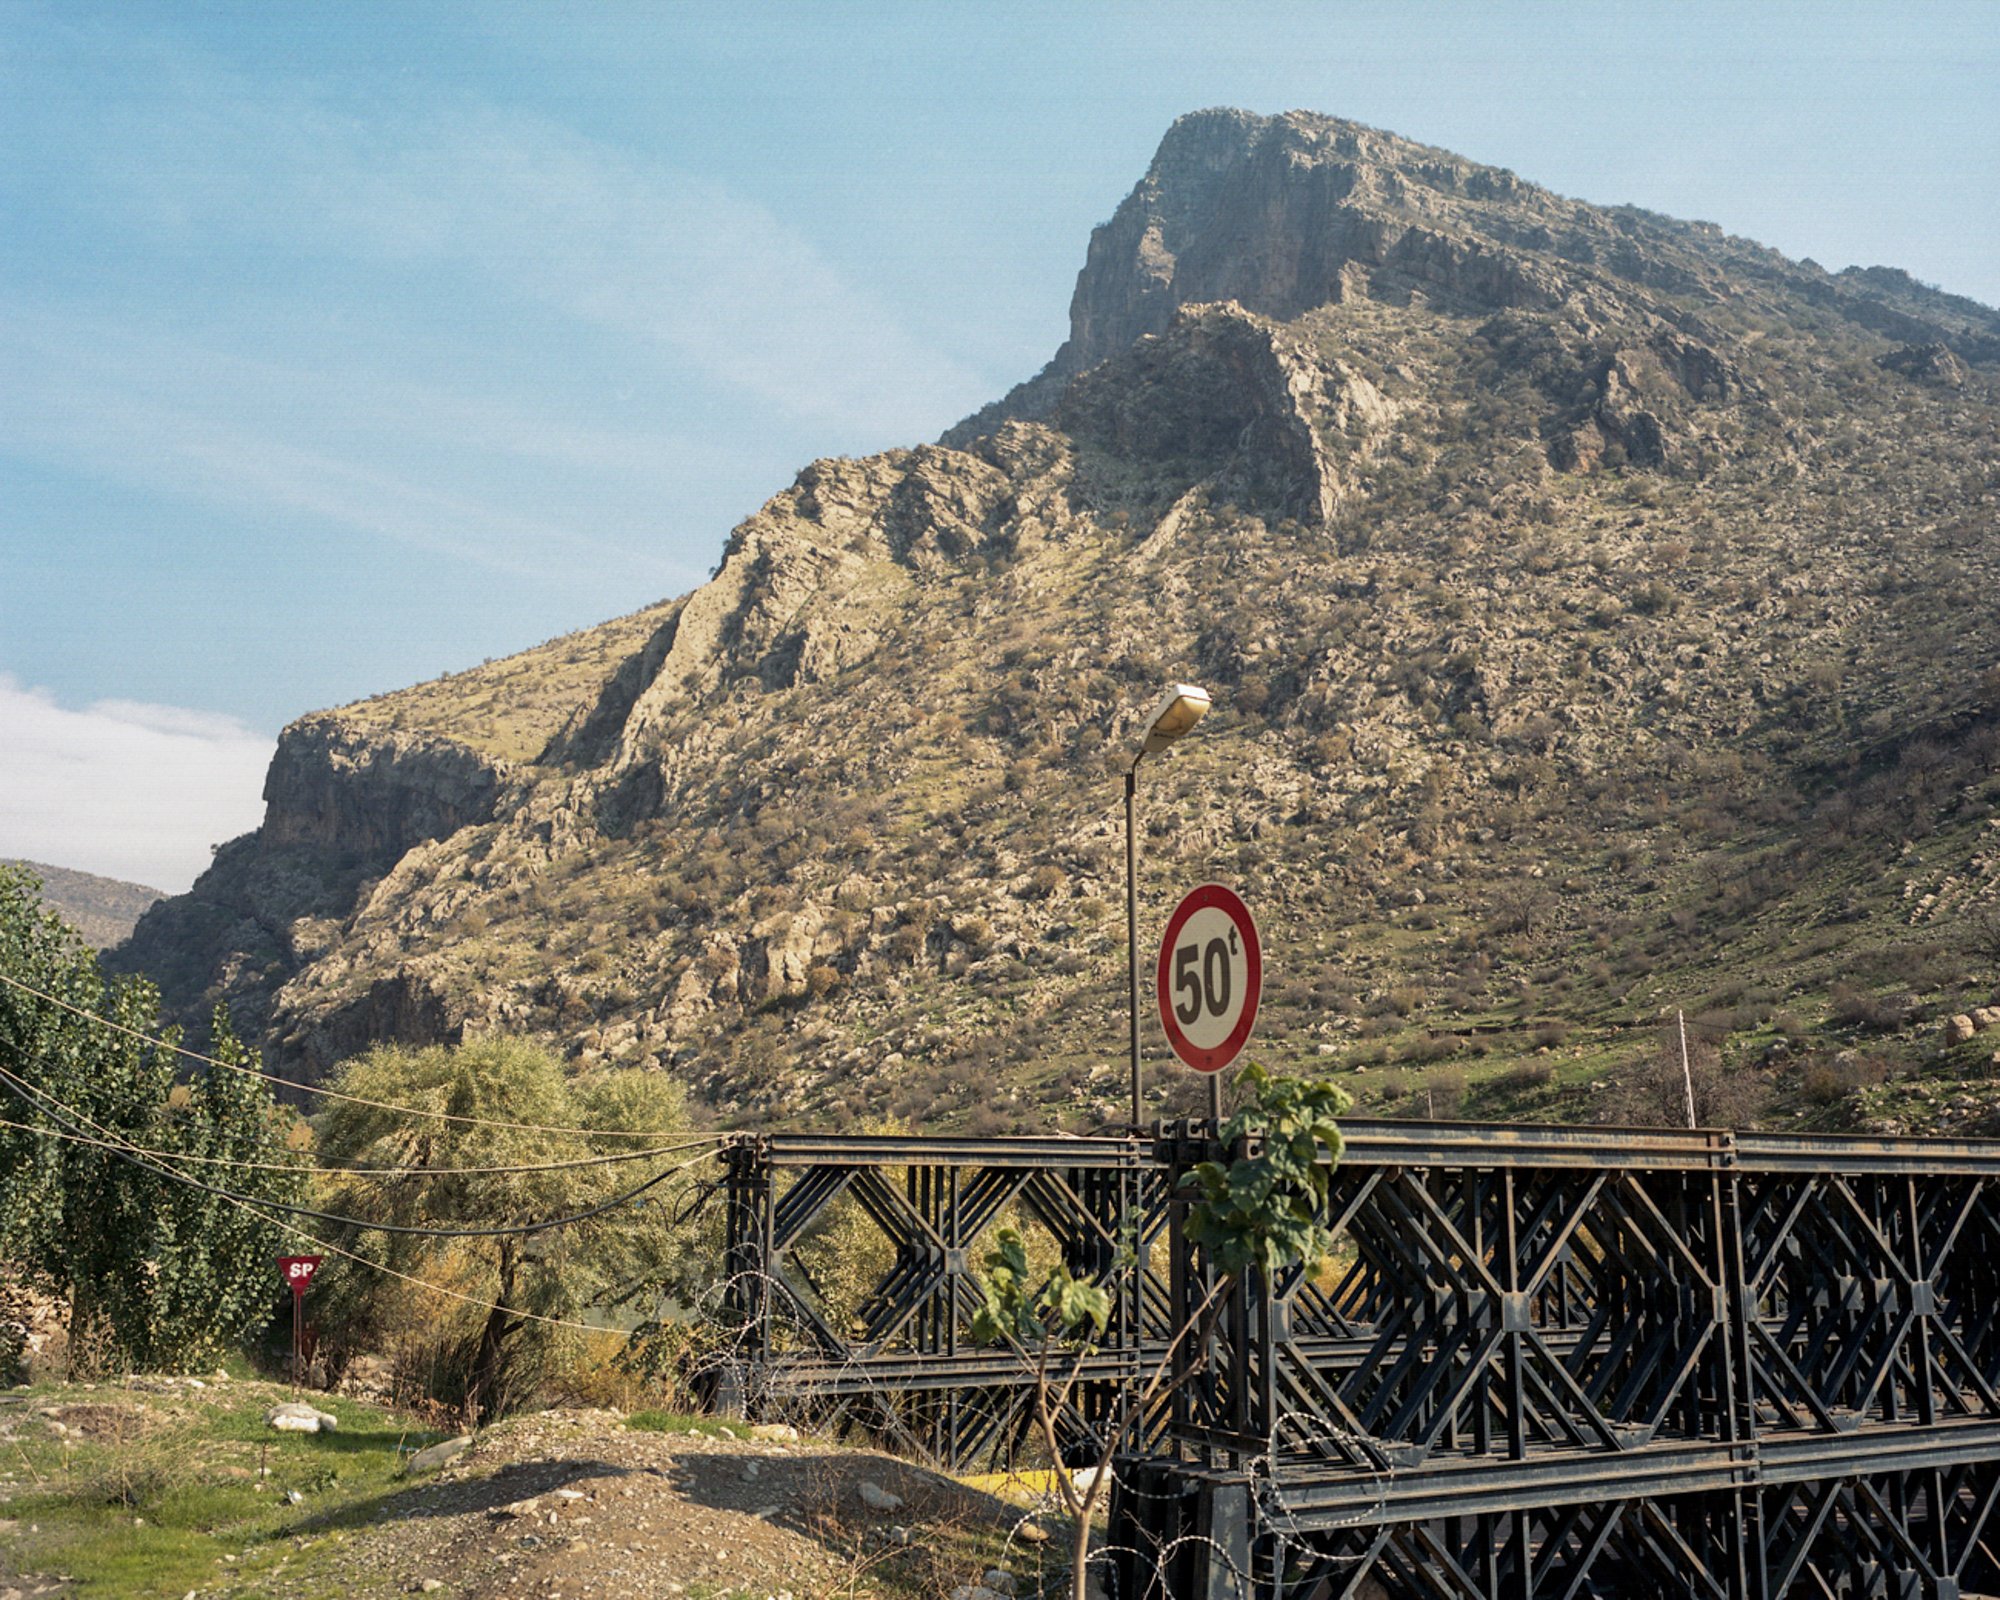  Minefield and Kurdish forces checkpoint at entrance of Balinda valley. This valley forms a crucial coridor towards Turkey, and is notorious for the ongoing fights between PKK and Turkish forces. A dam is planned in this valley. Amadiya, Iraq. 